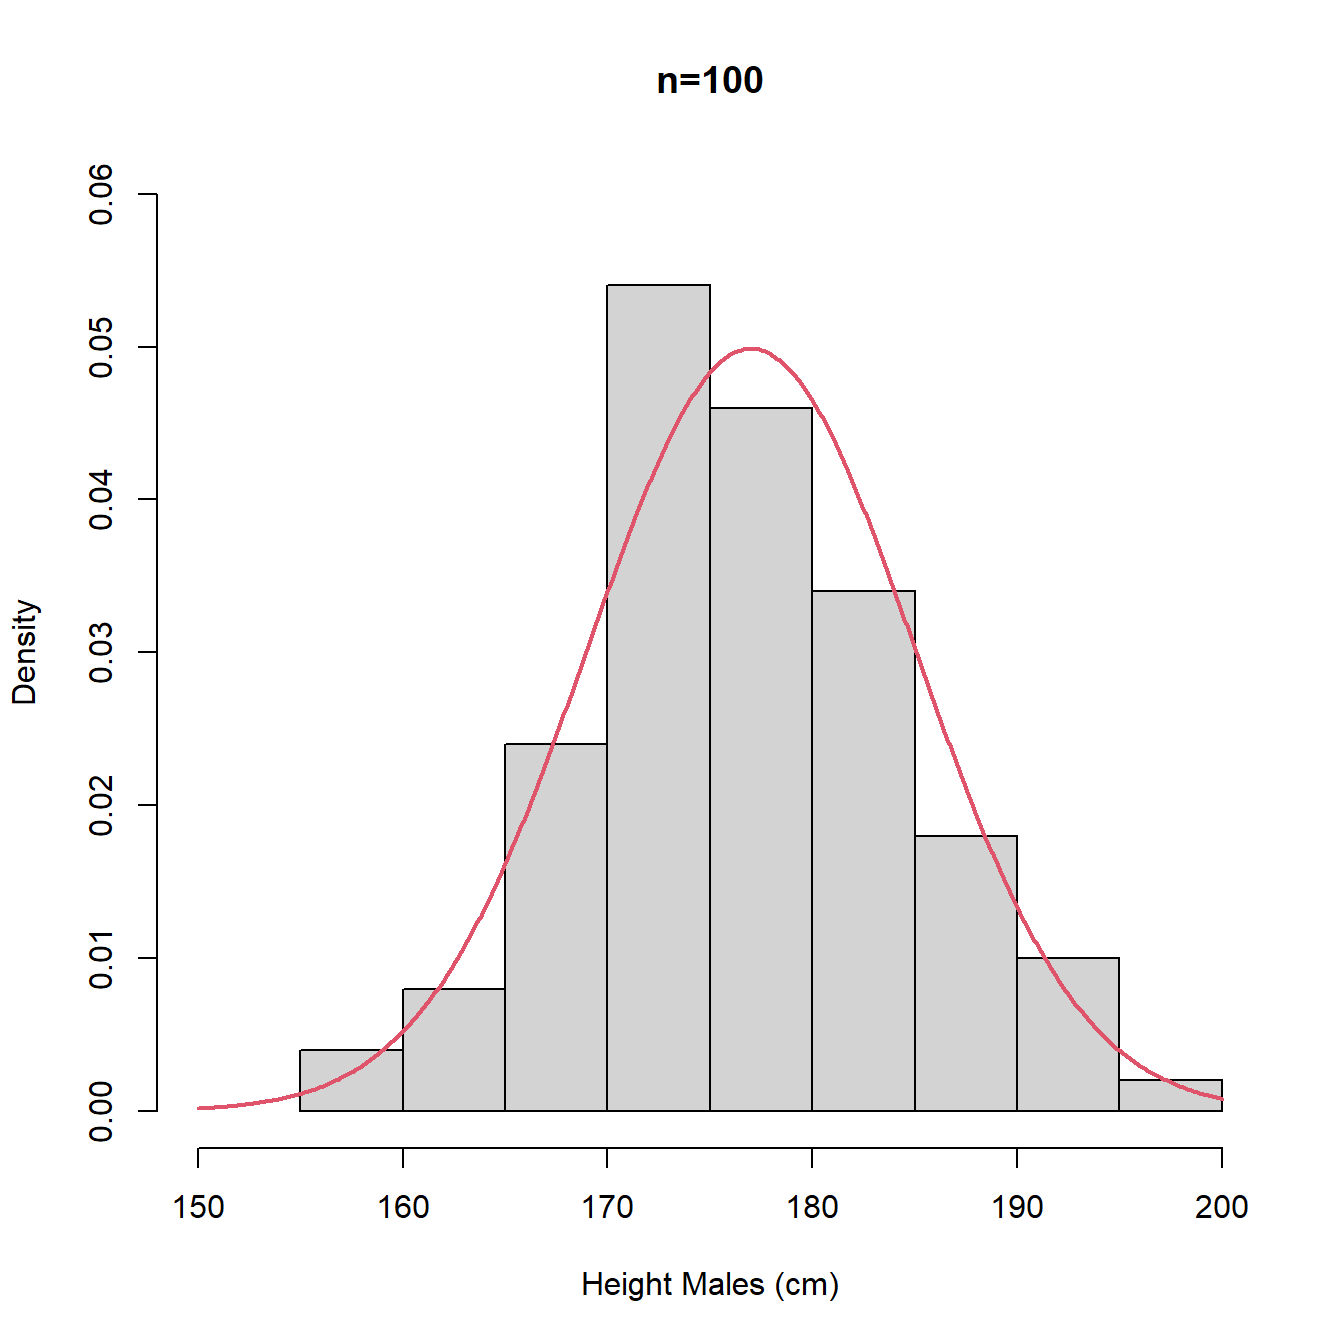 Histograms with different intervals